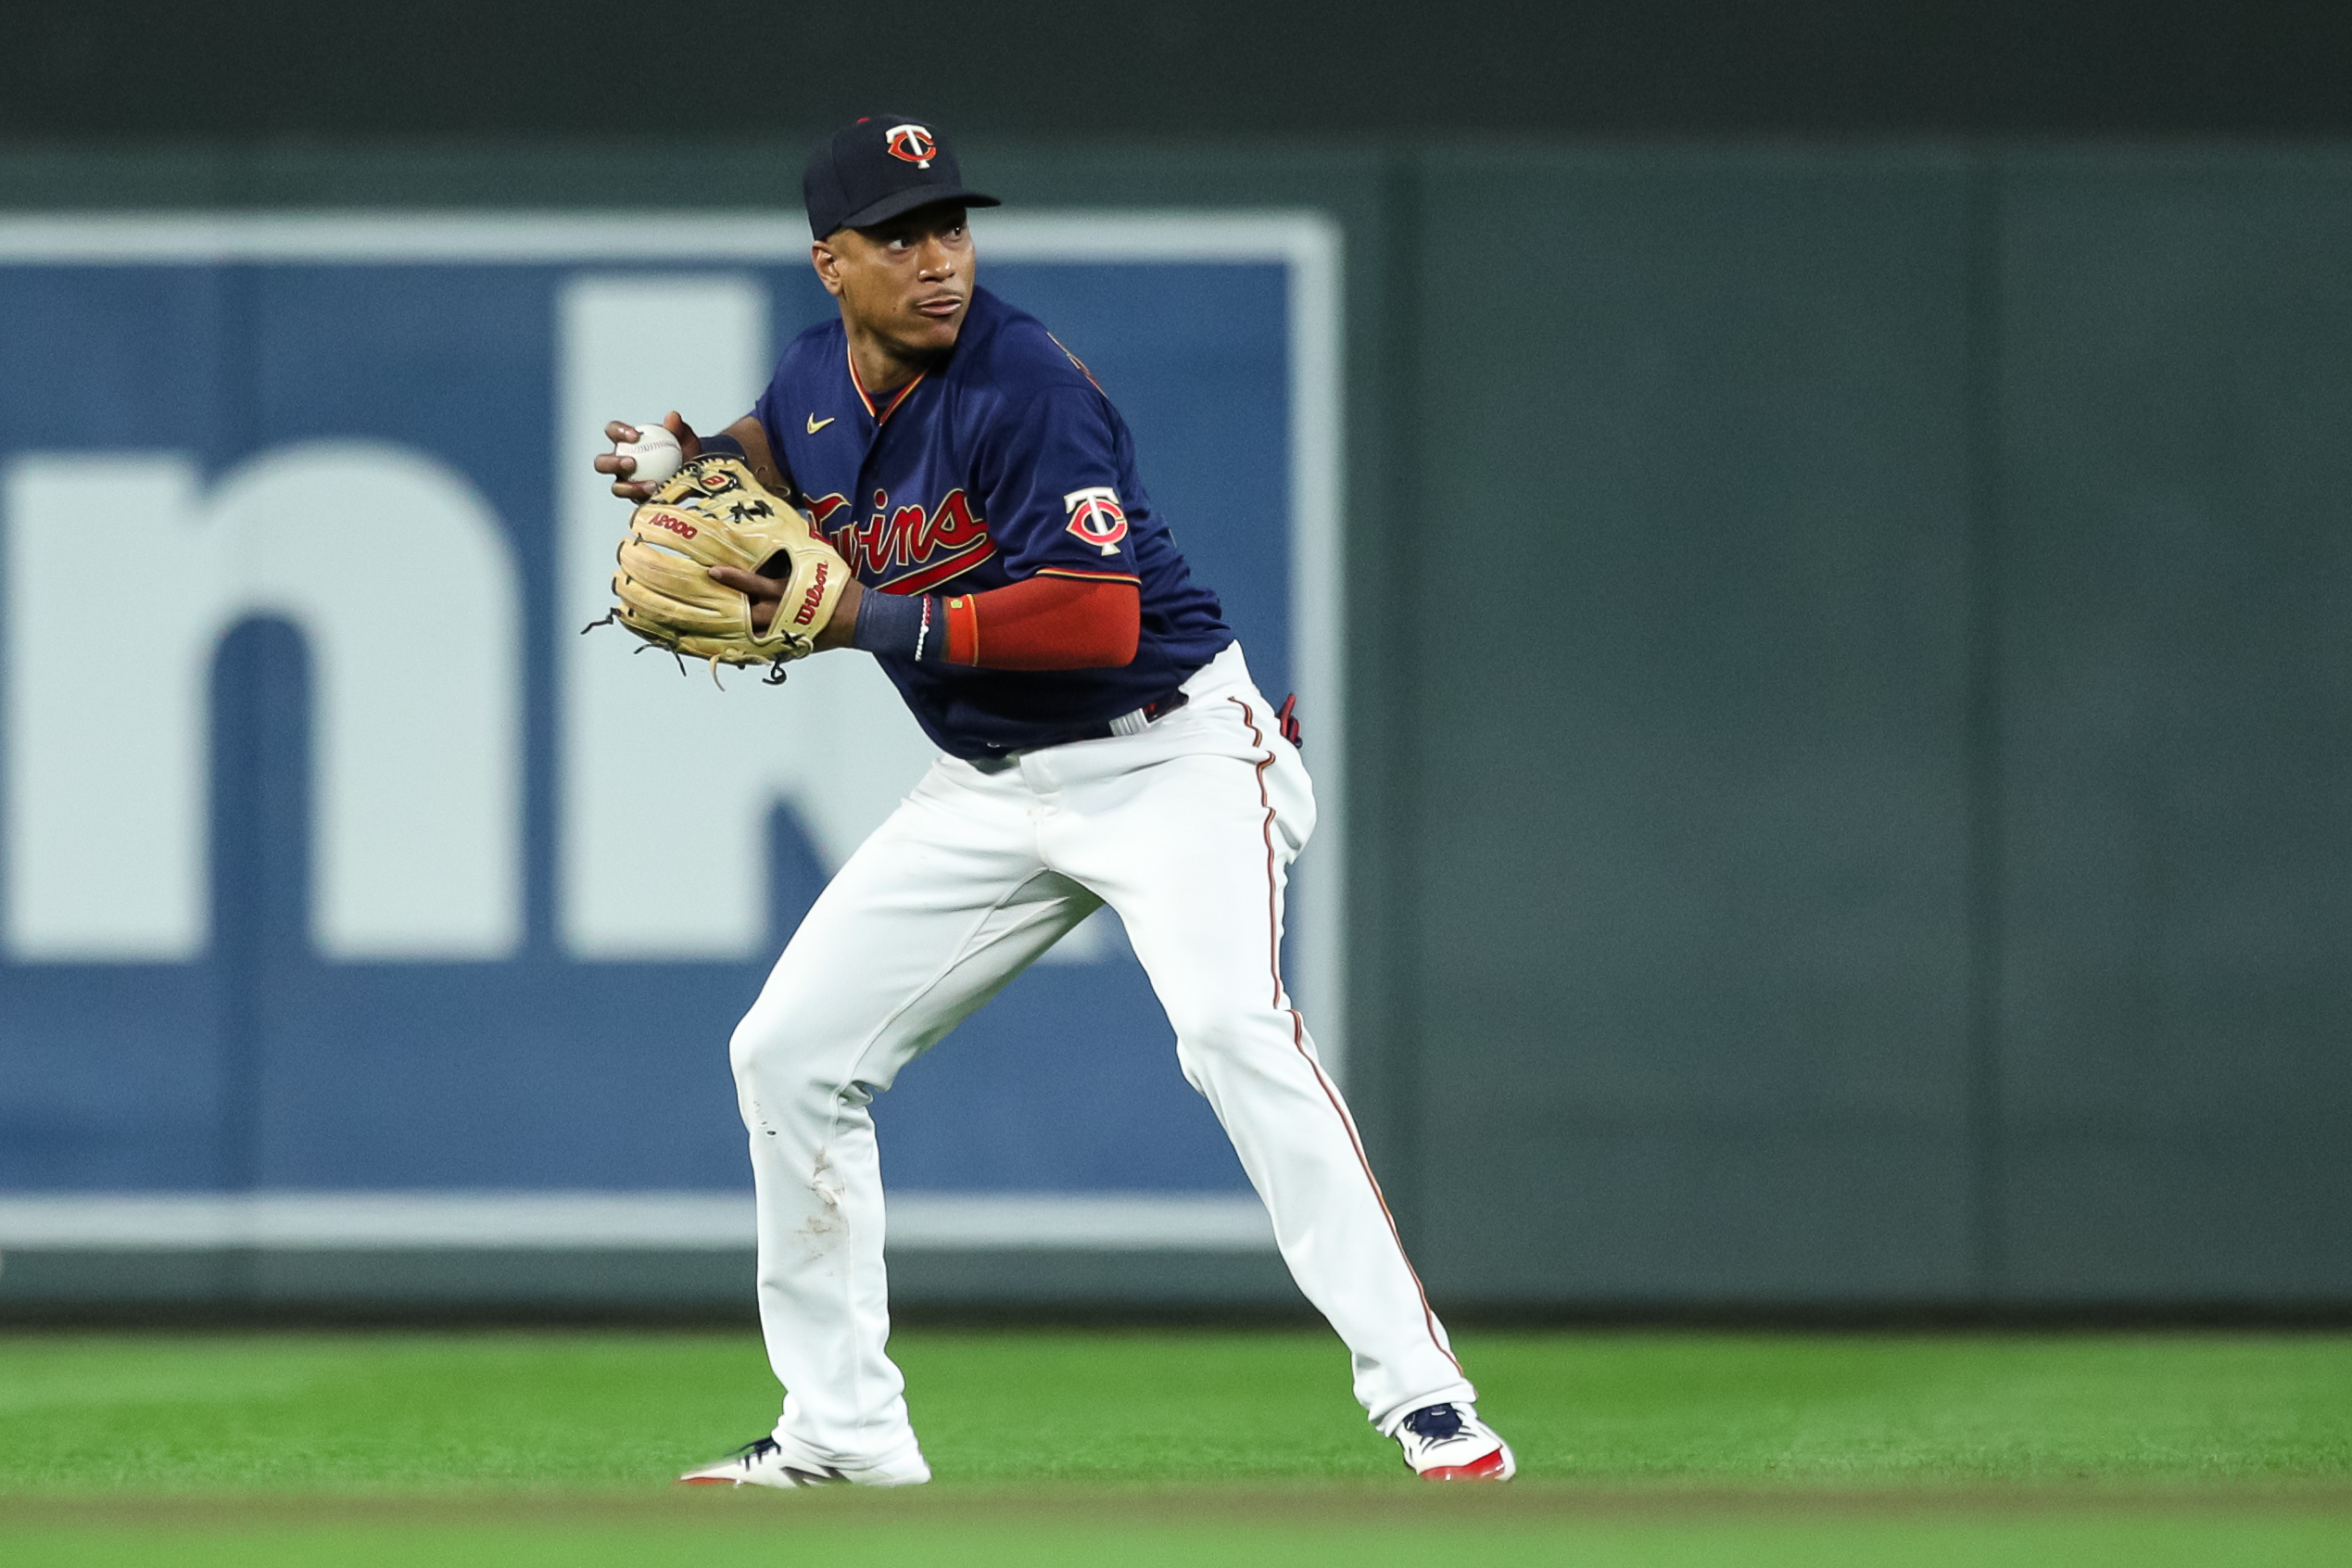 Javier Baez back with a bang, but how will Mets align once Francisco Lindor  returns?